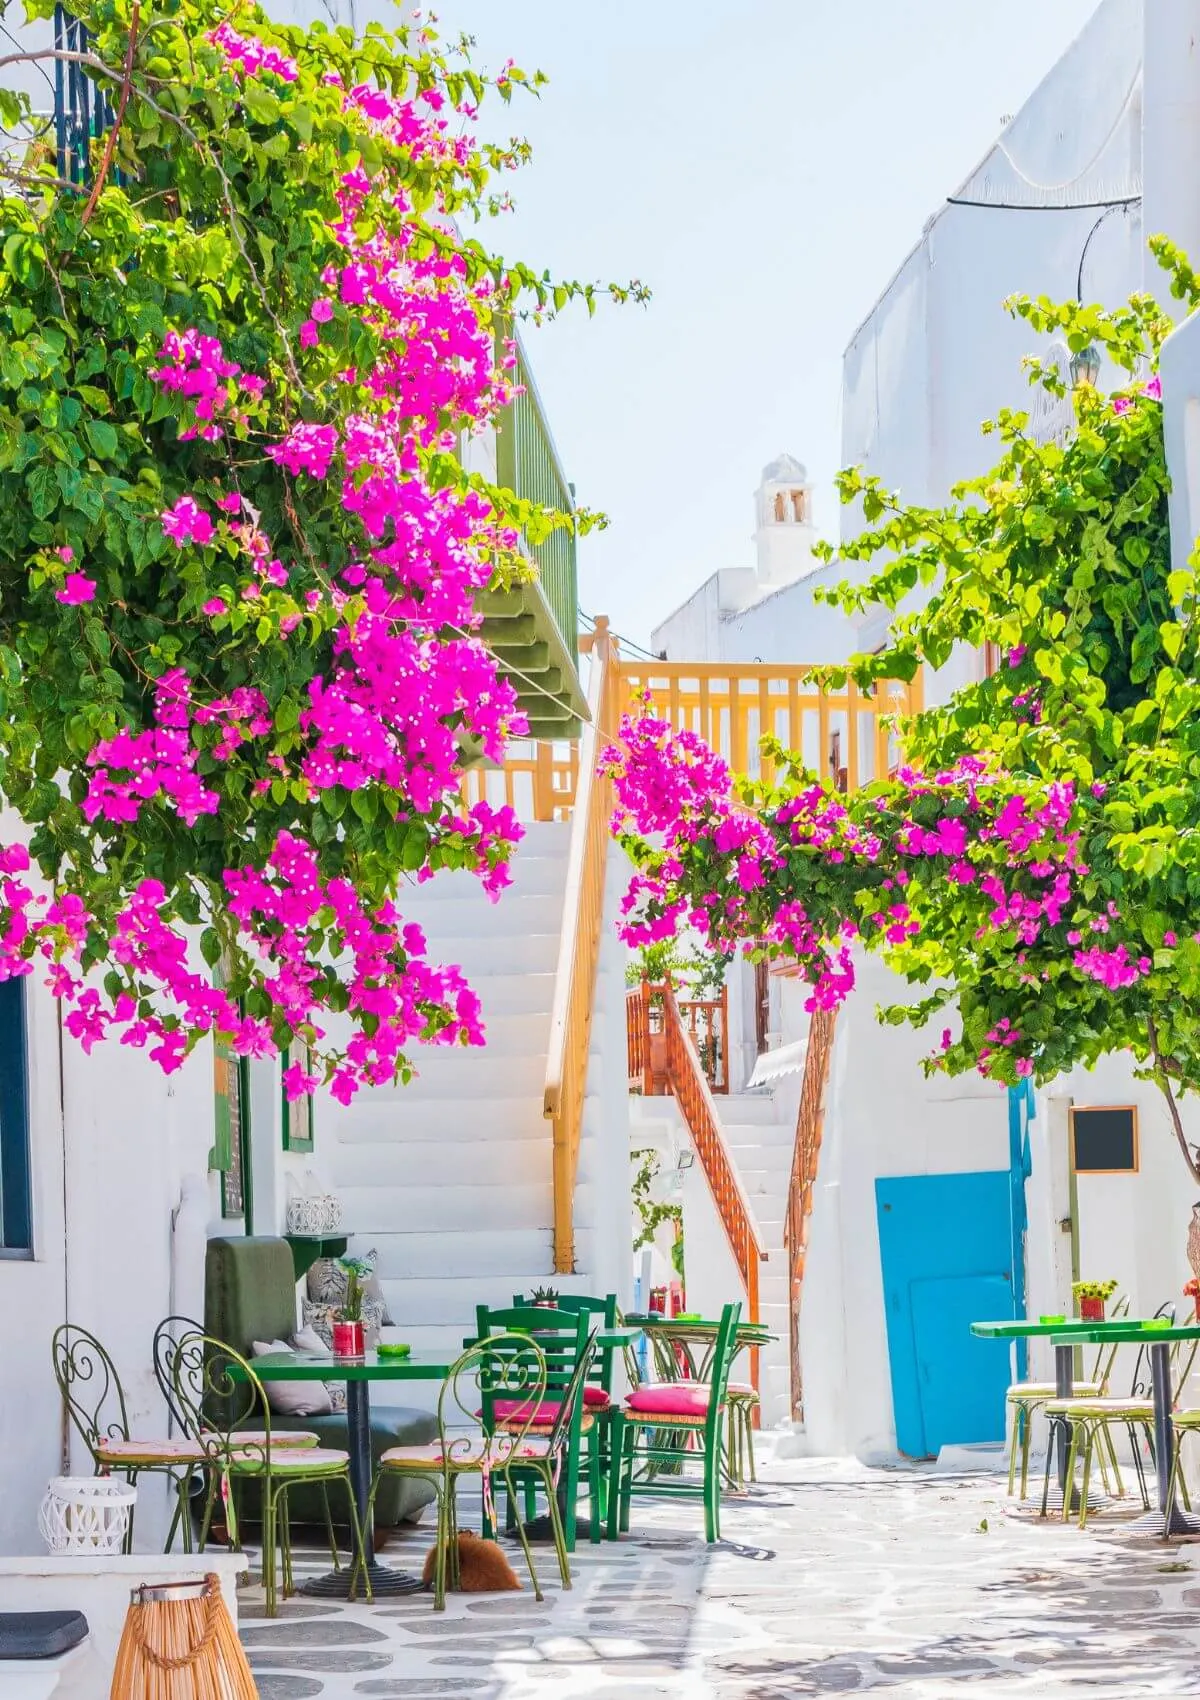 where to go in mykonos